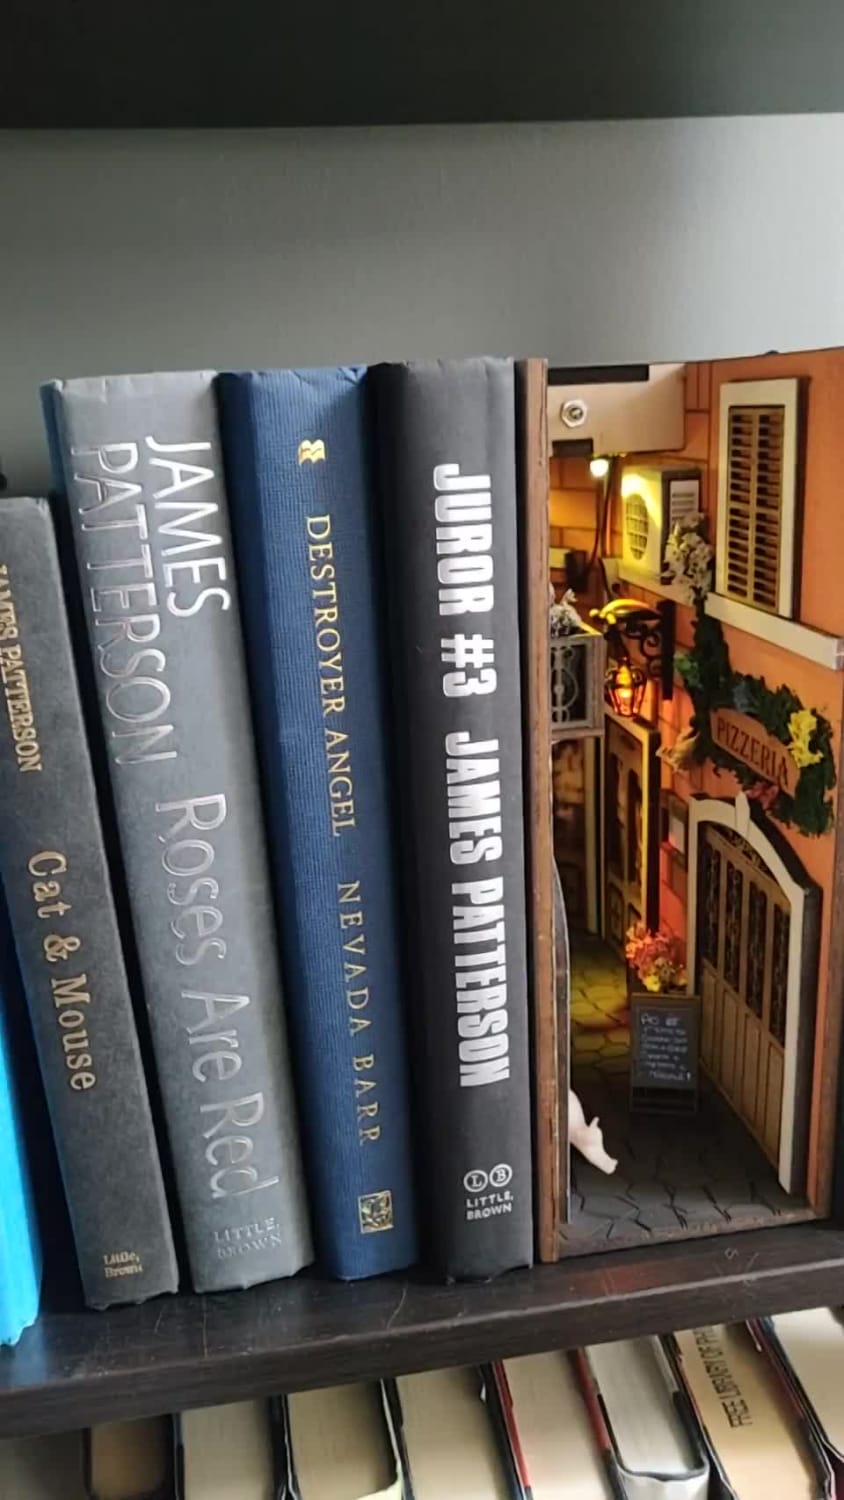 I make miniAlley on Bookshelf. This is one of my favorite: the Italy miniAlley .